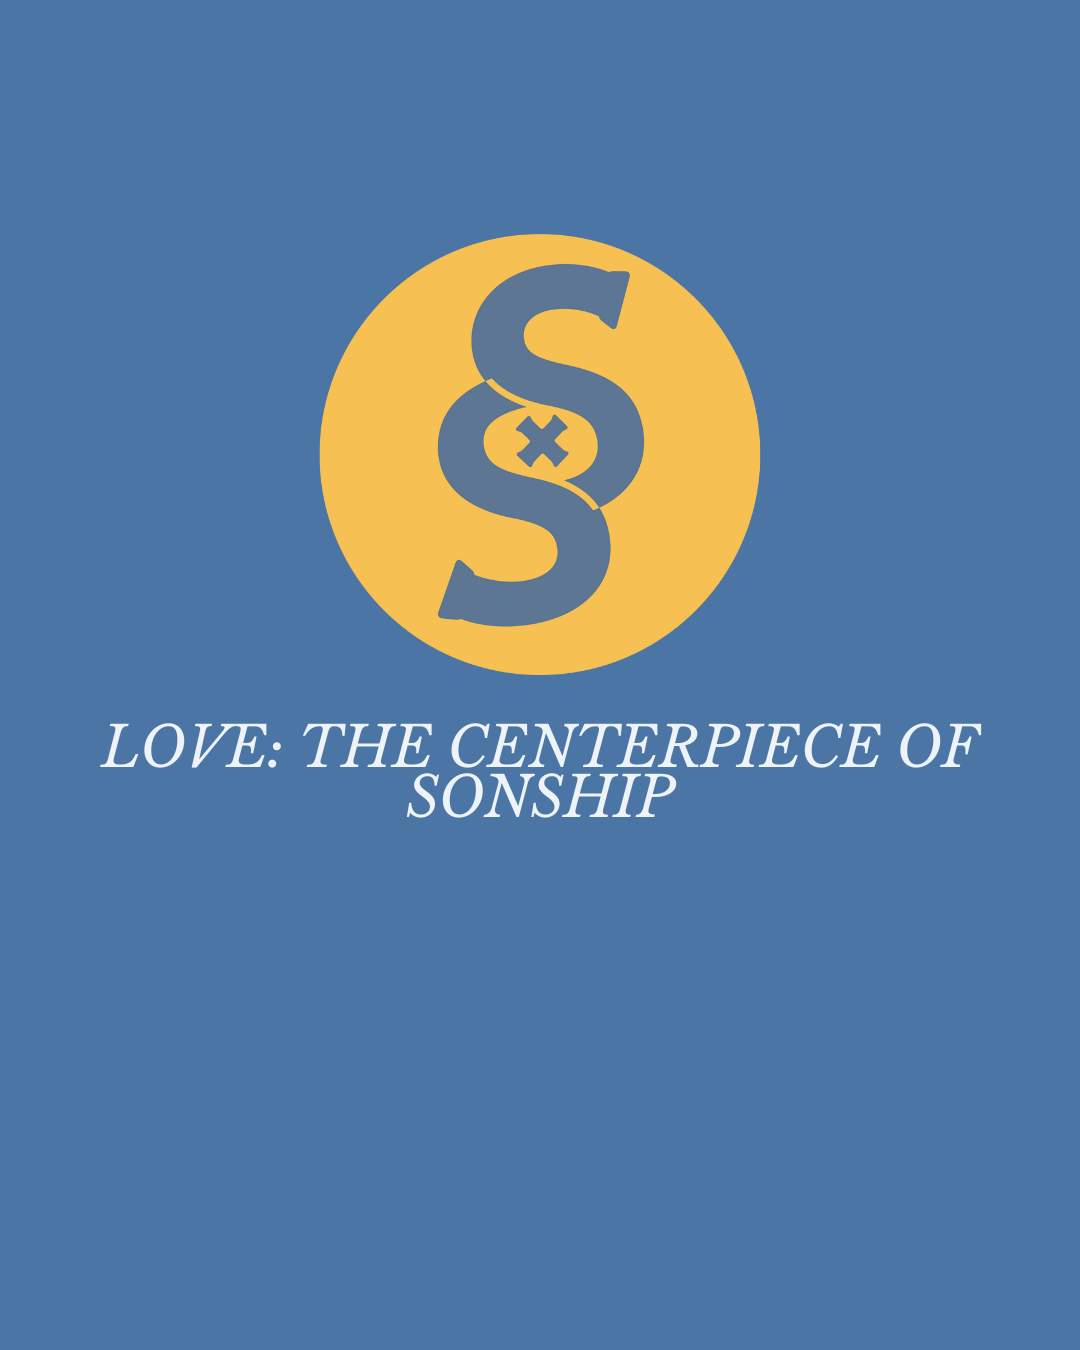 Love: The Centerpiece of Sonship